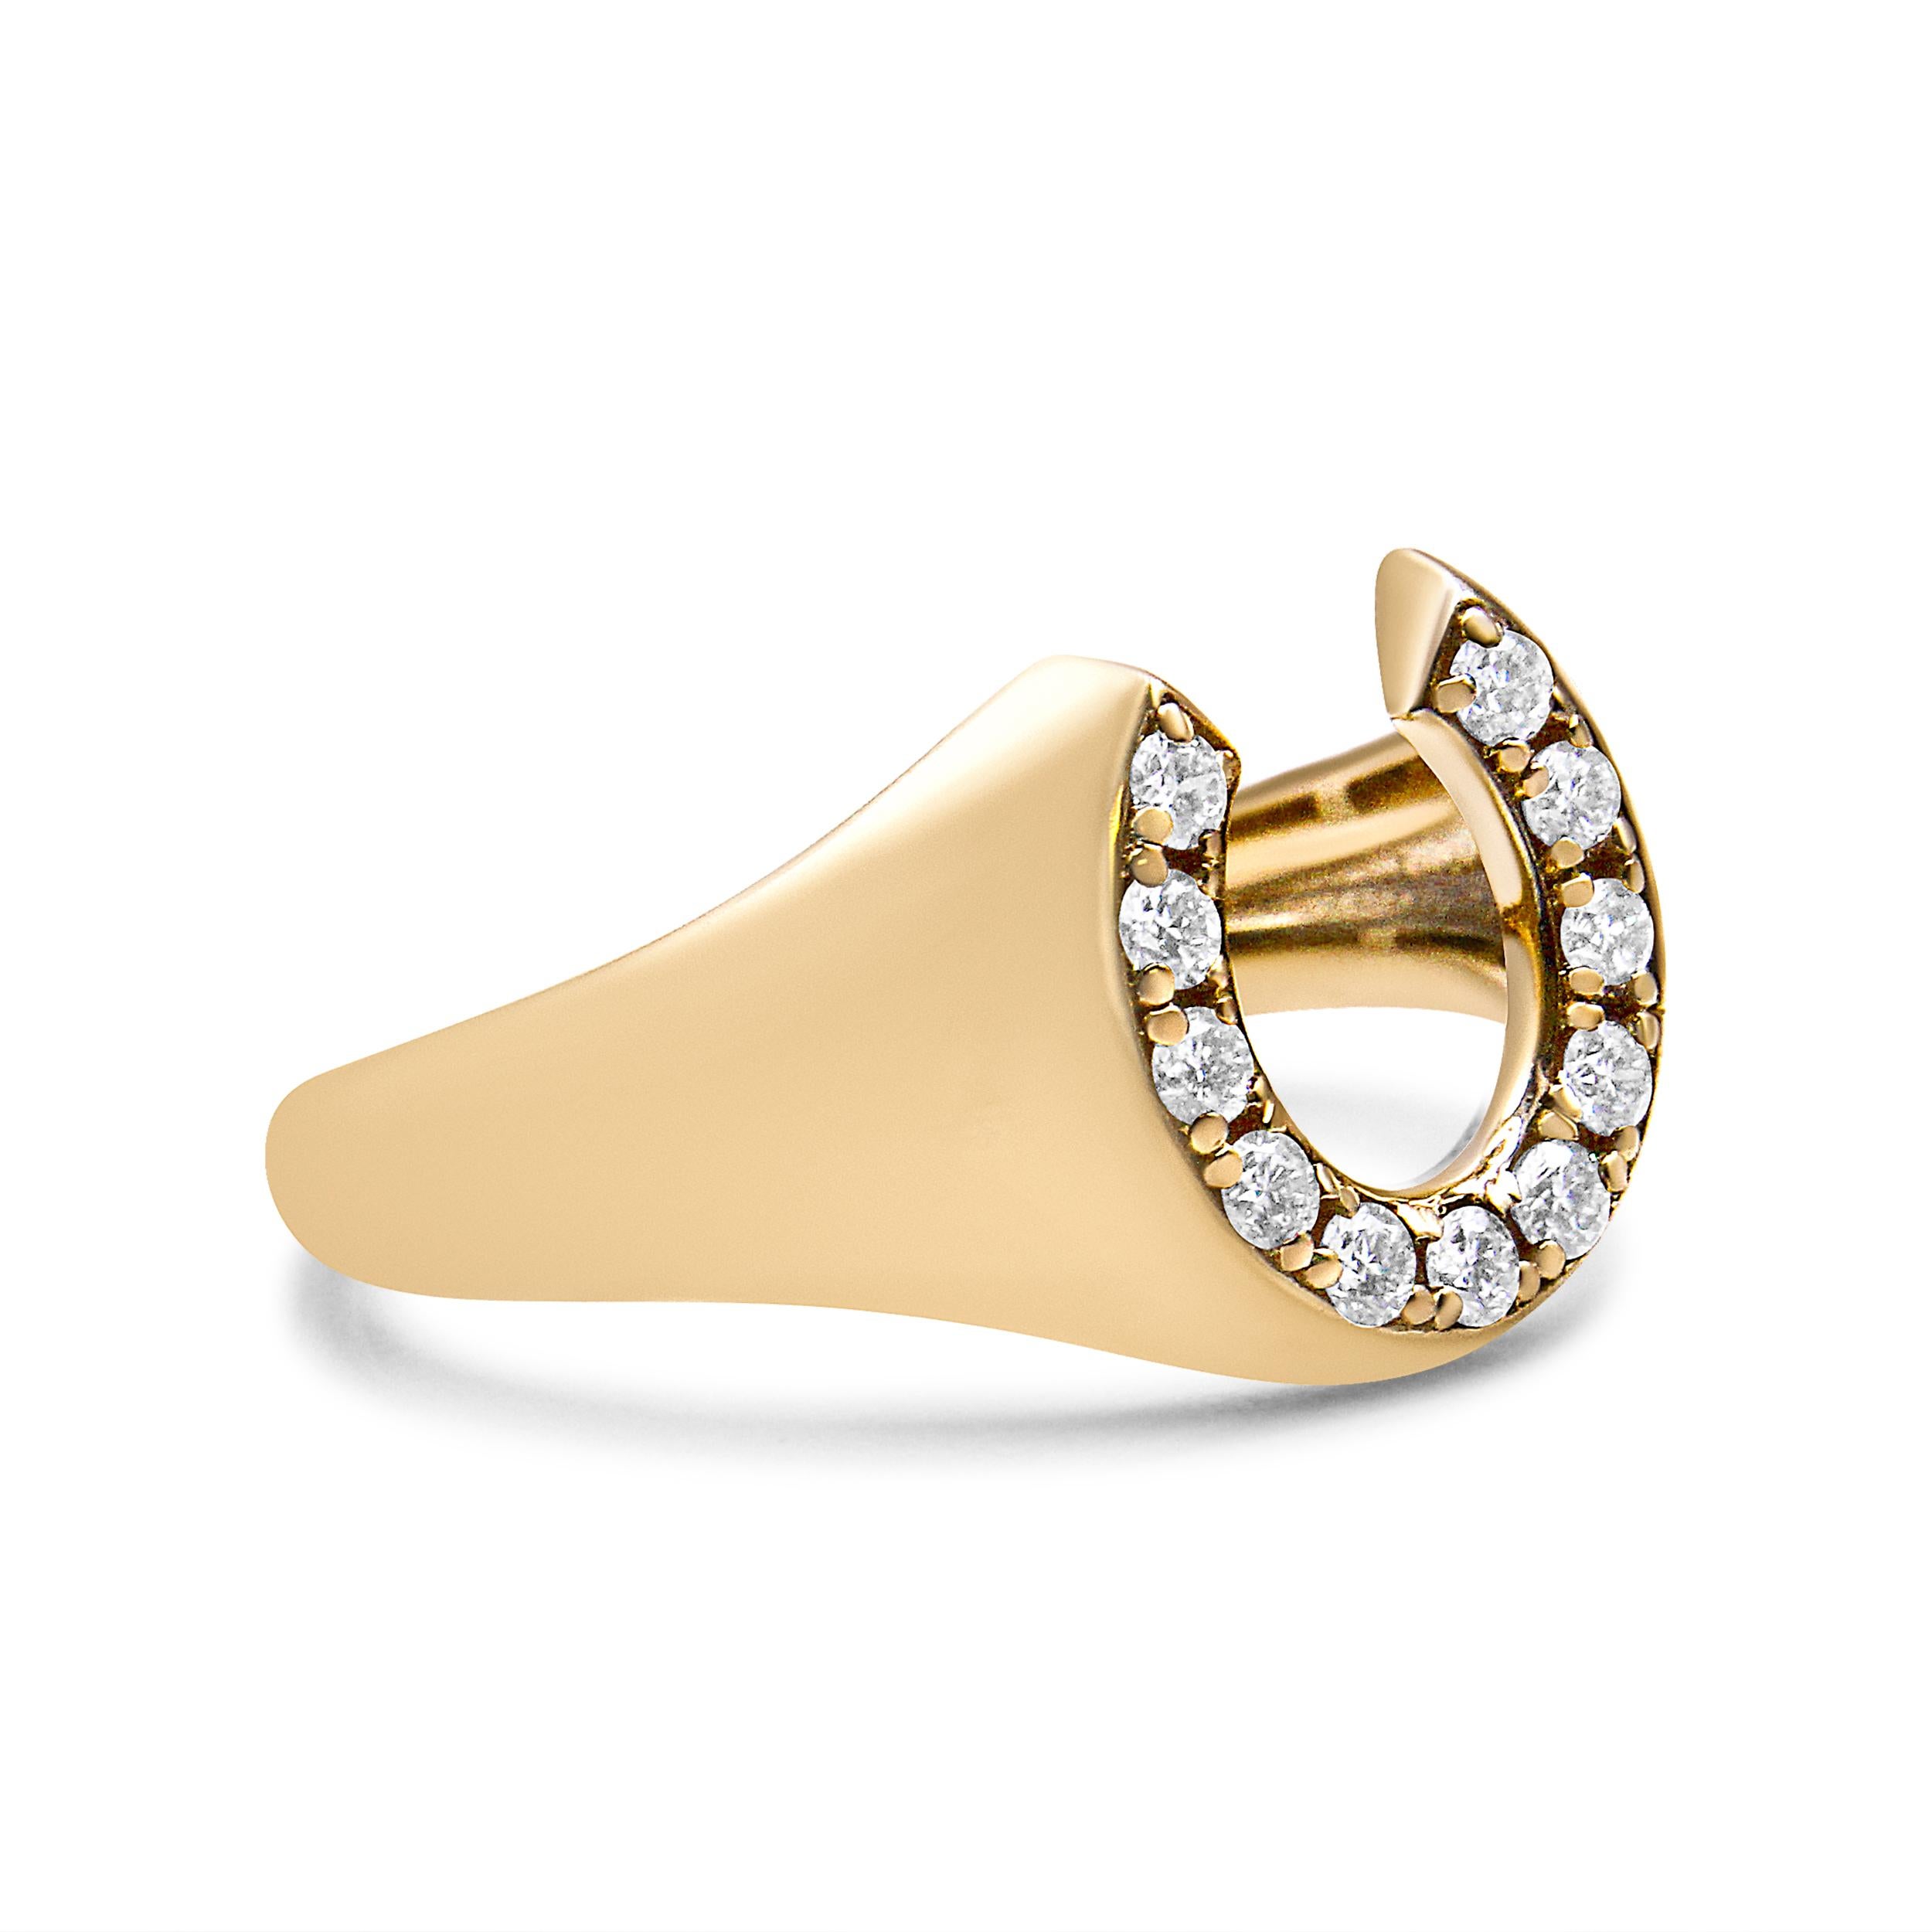 Bold and striking, this 1/3 c.t. diamond men's ring has a horseshoe design as its central motif. The horseshoe is embellished with sparkling and natural round-cut diamonds in a classic 4-prong setting. The band is crafted in genuine 10k yellow gold,